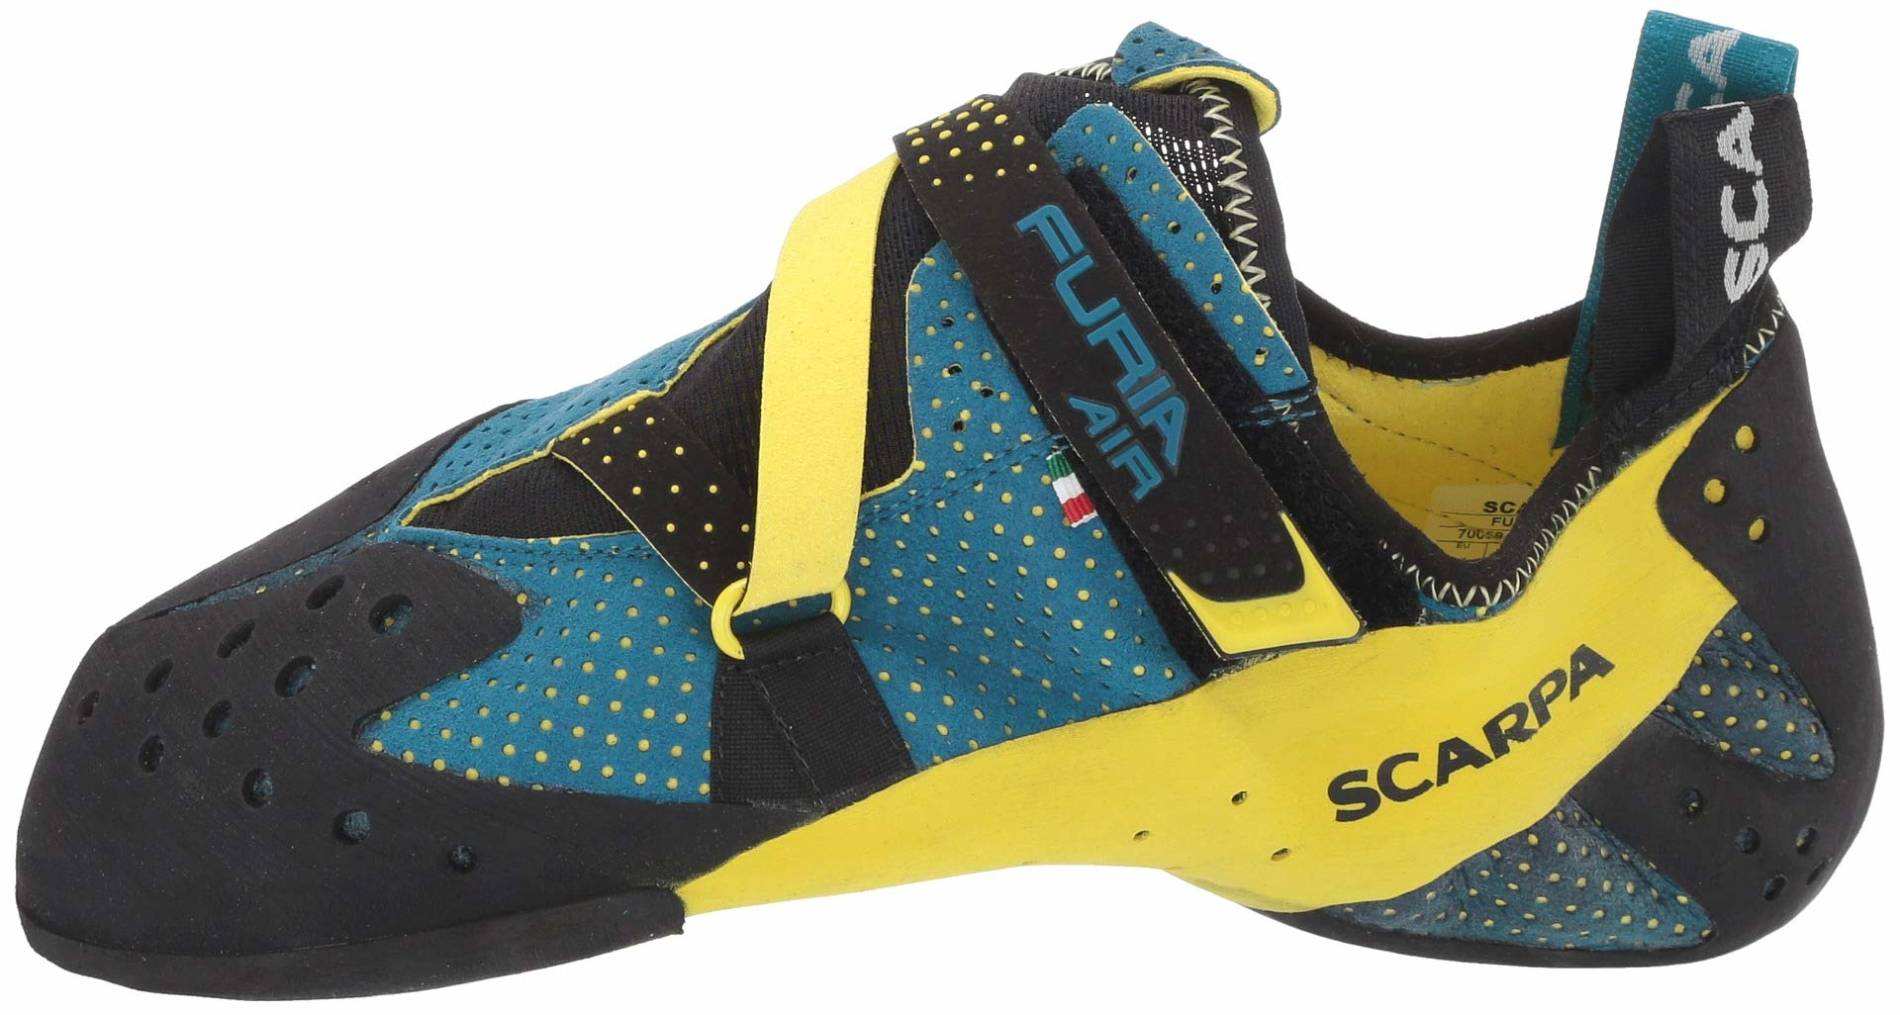 Only $199 + Review of Scarpa Furia Air 